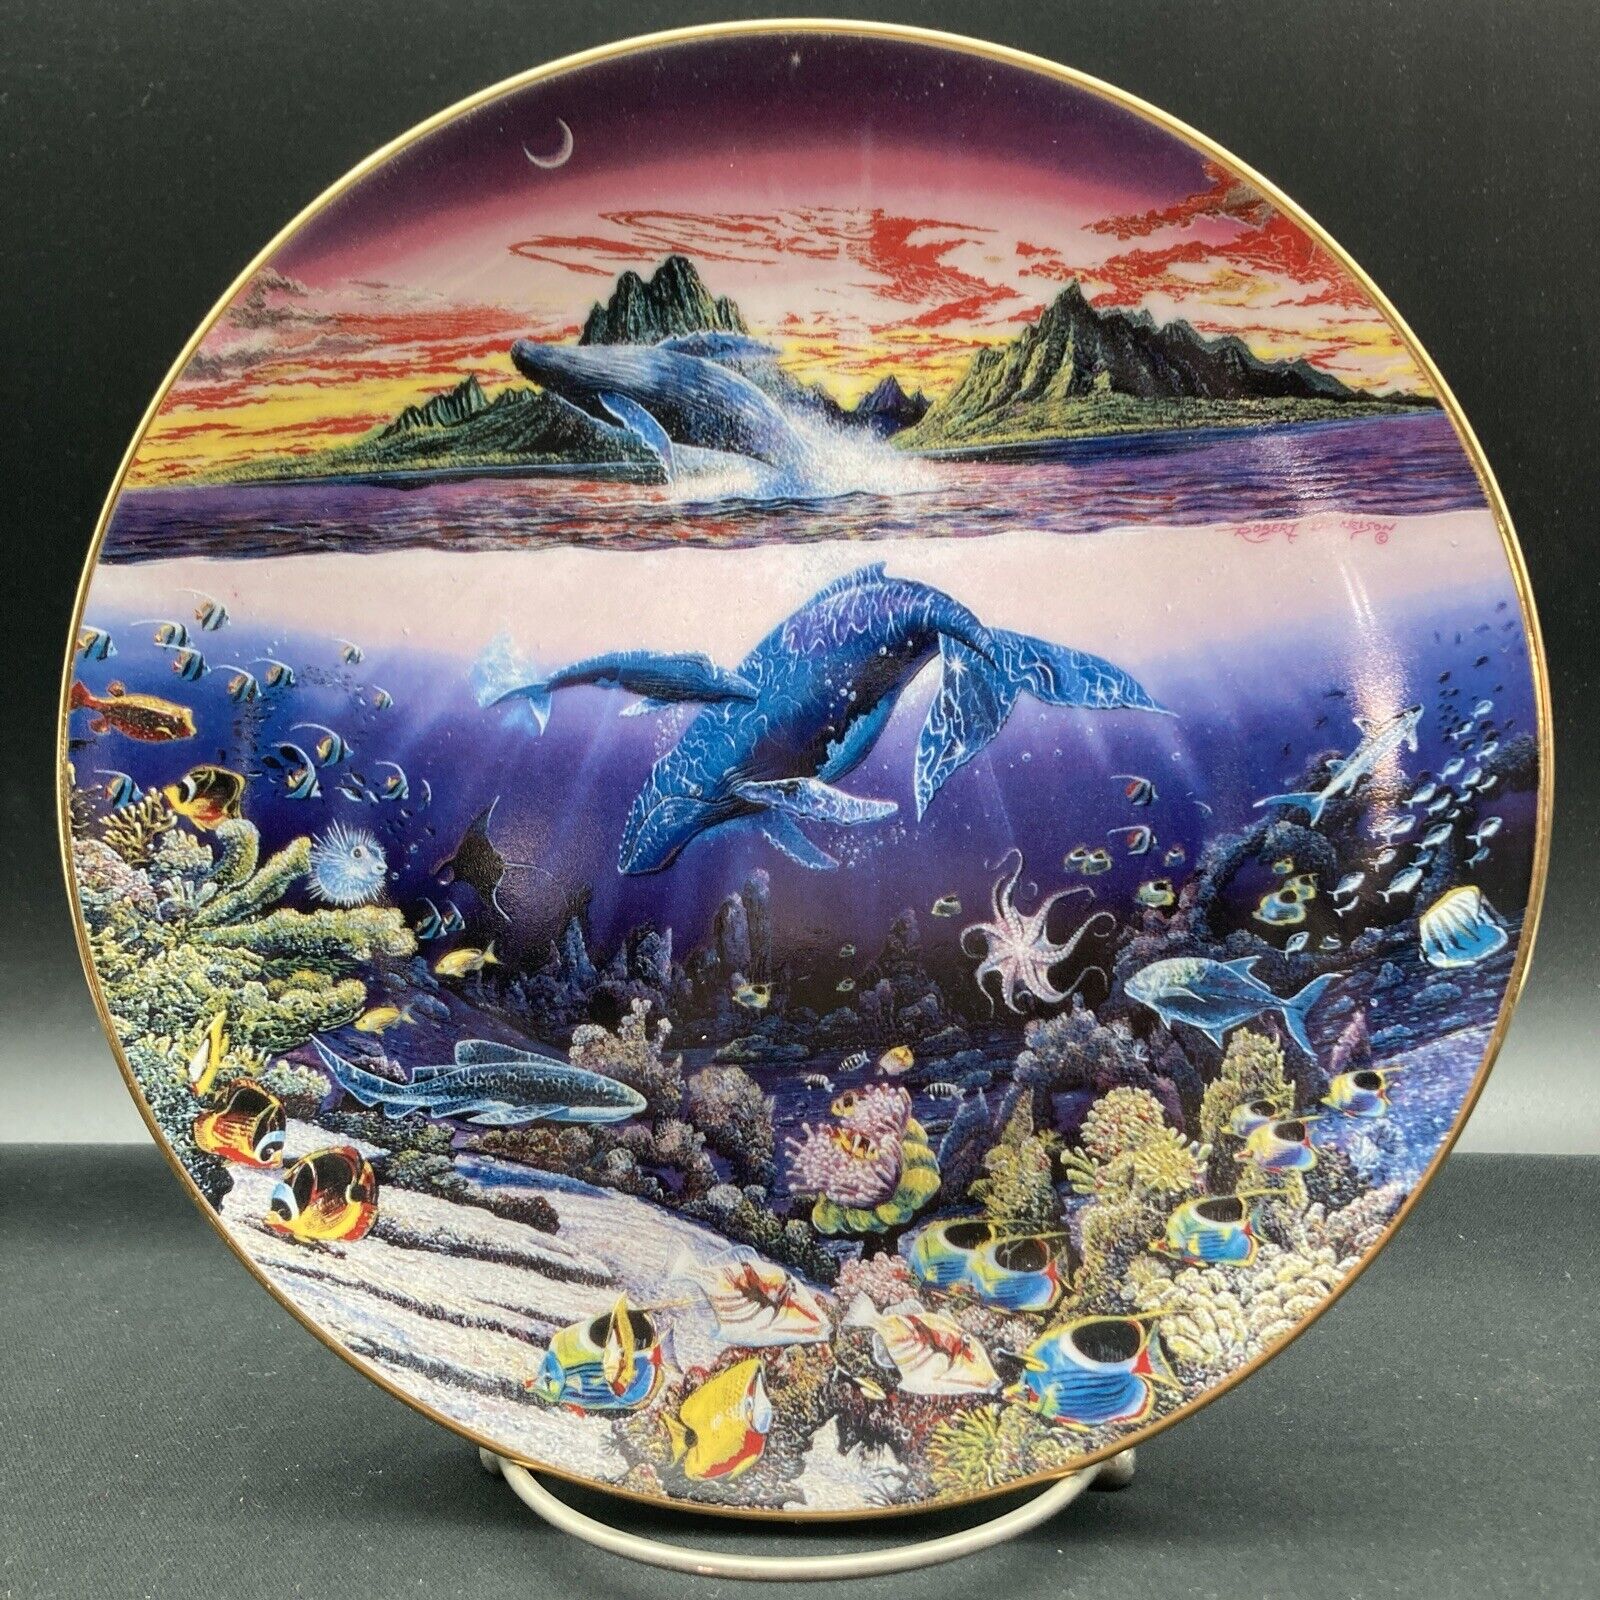 New Moon Over Windward Oahu Underwater Paradise Danbury Mint Collector Plate ~